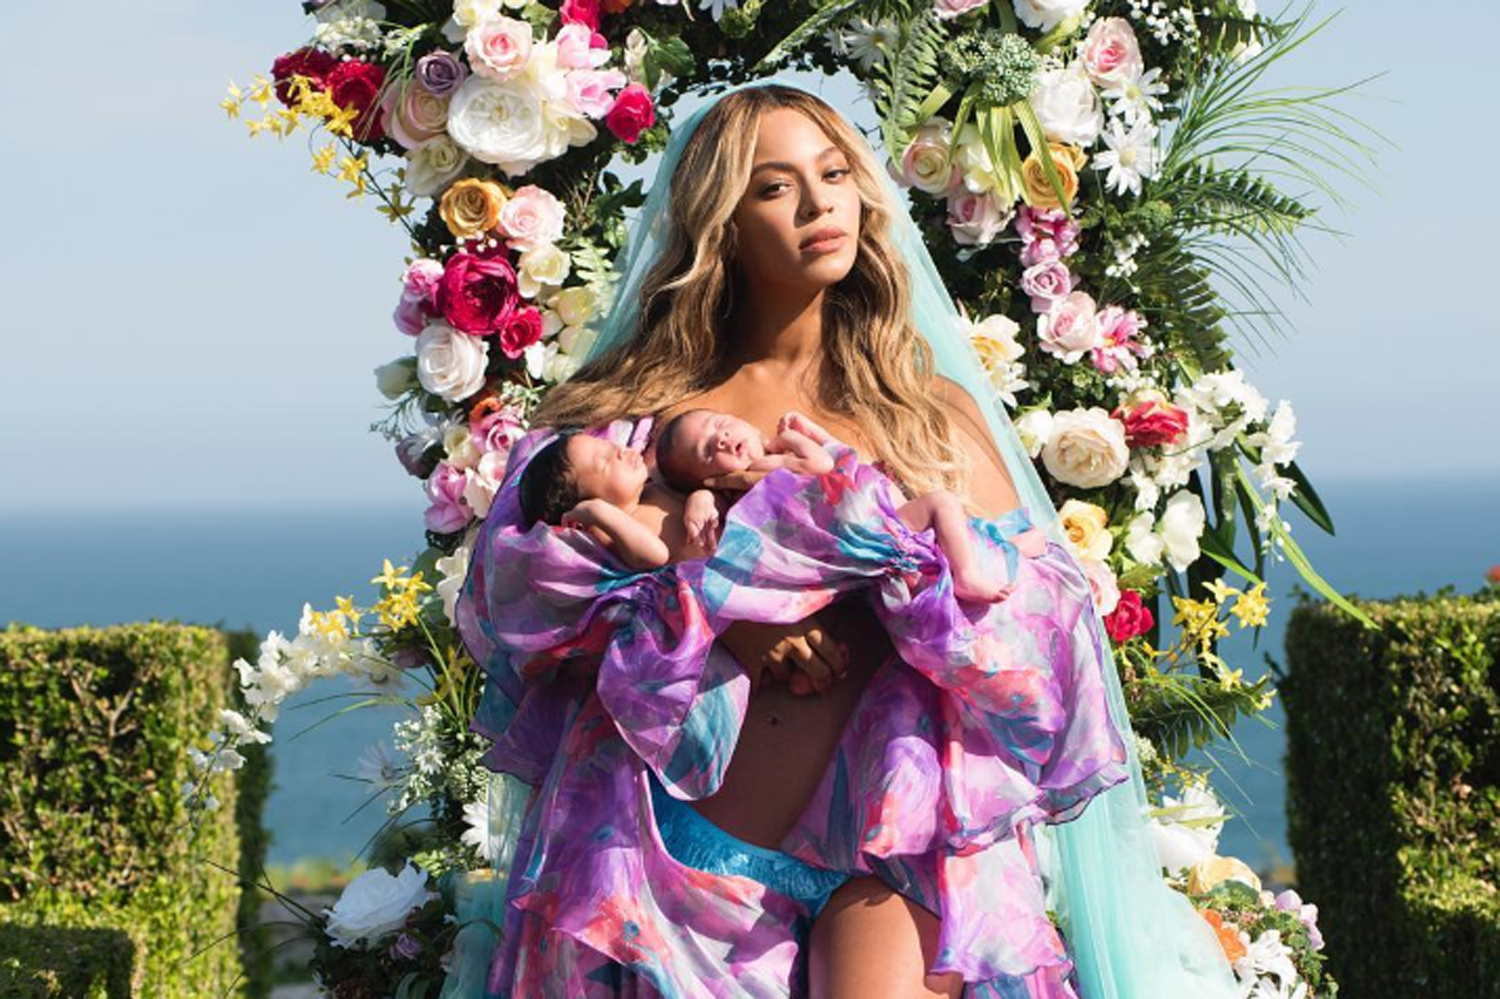 Beyoncé revealed her twins, Sir Carter and Rumi, to the world on Instagram July 14, 2017. (Instagram/Beyonce)